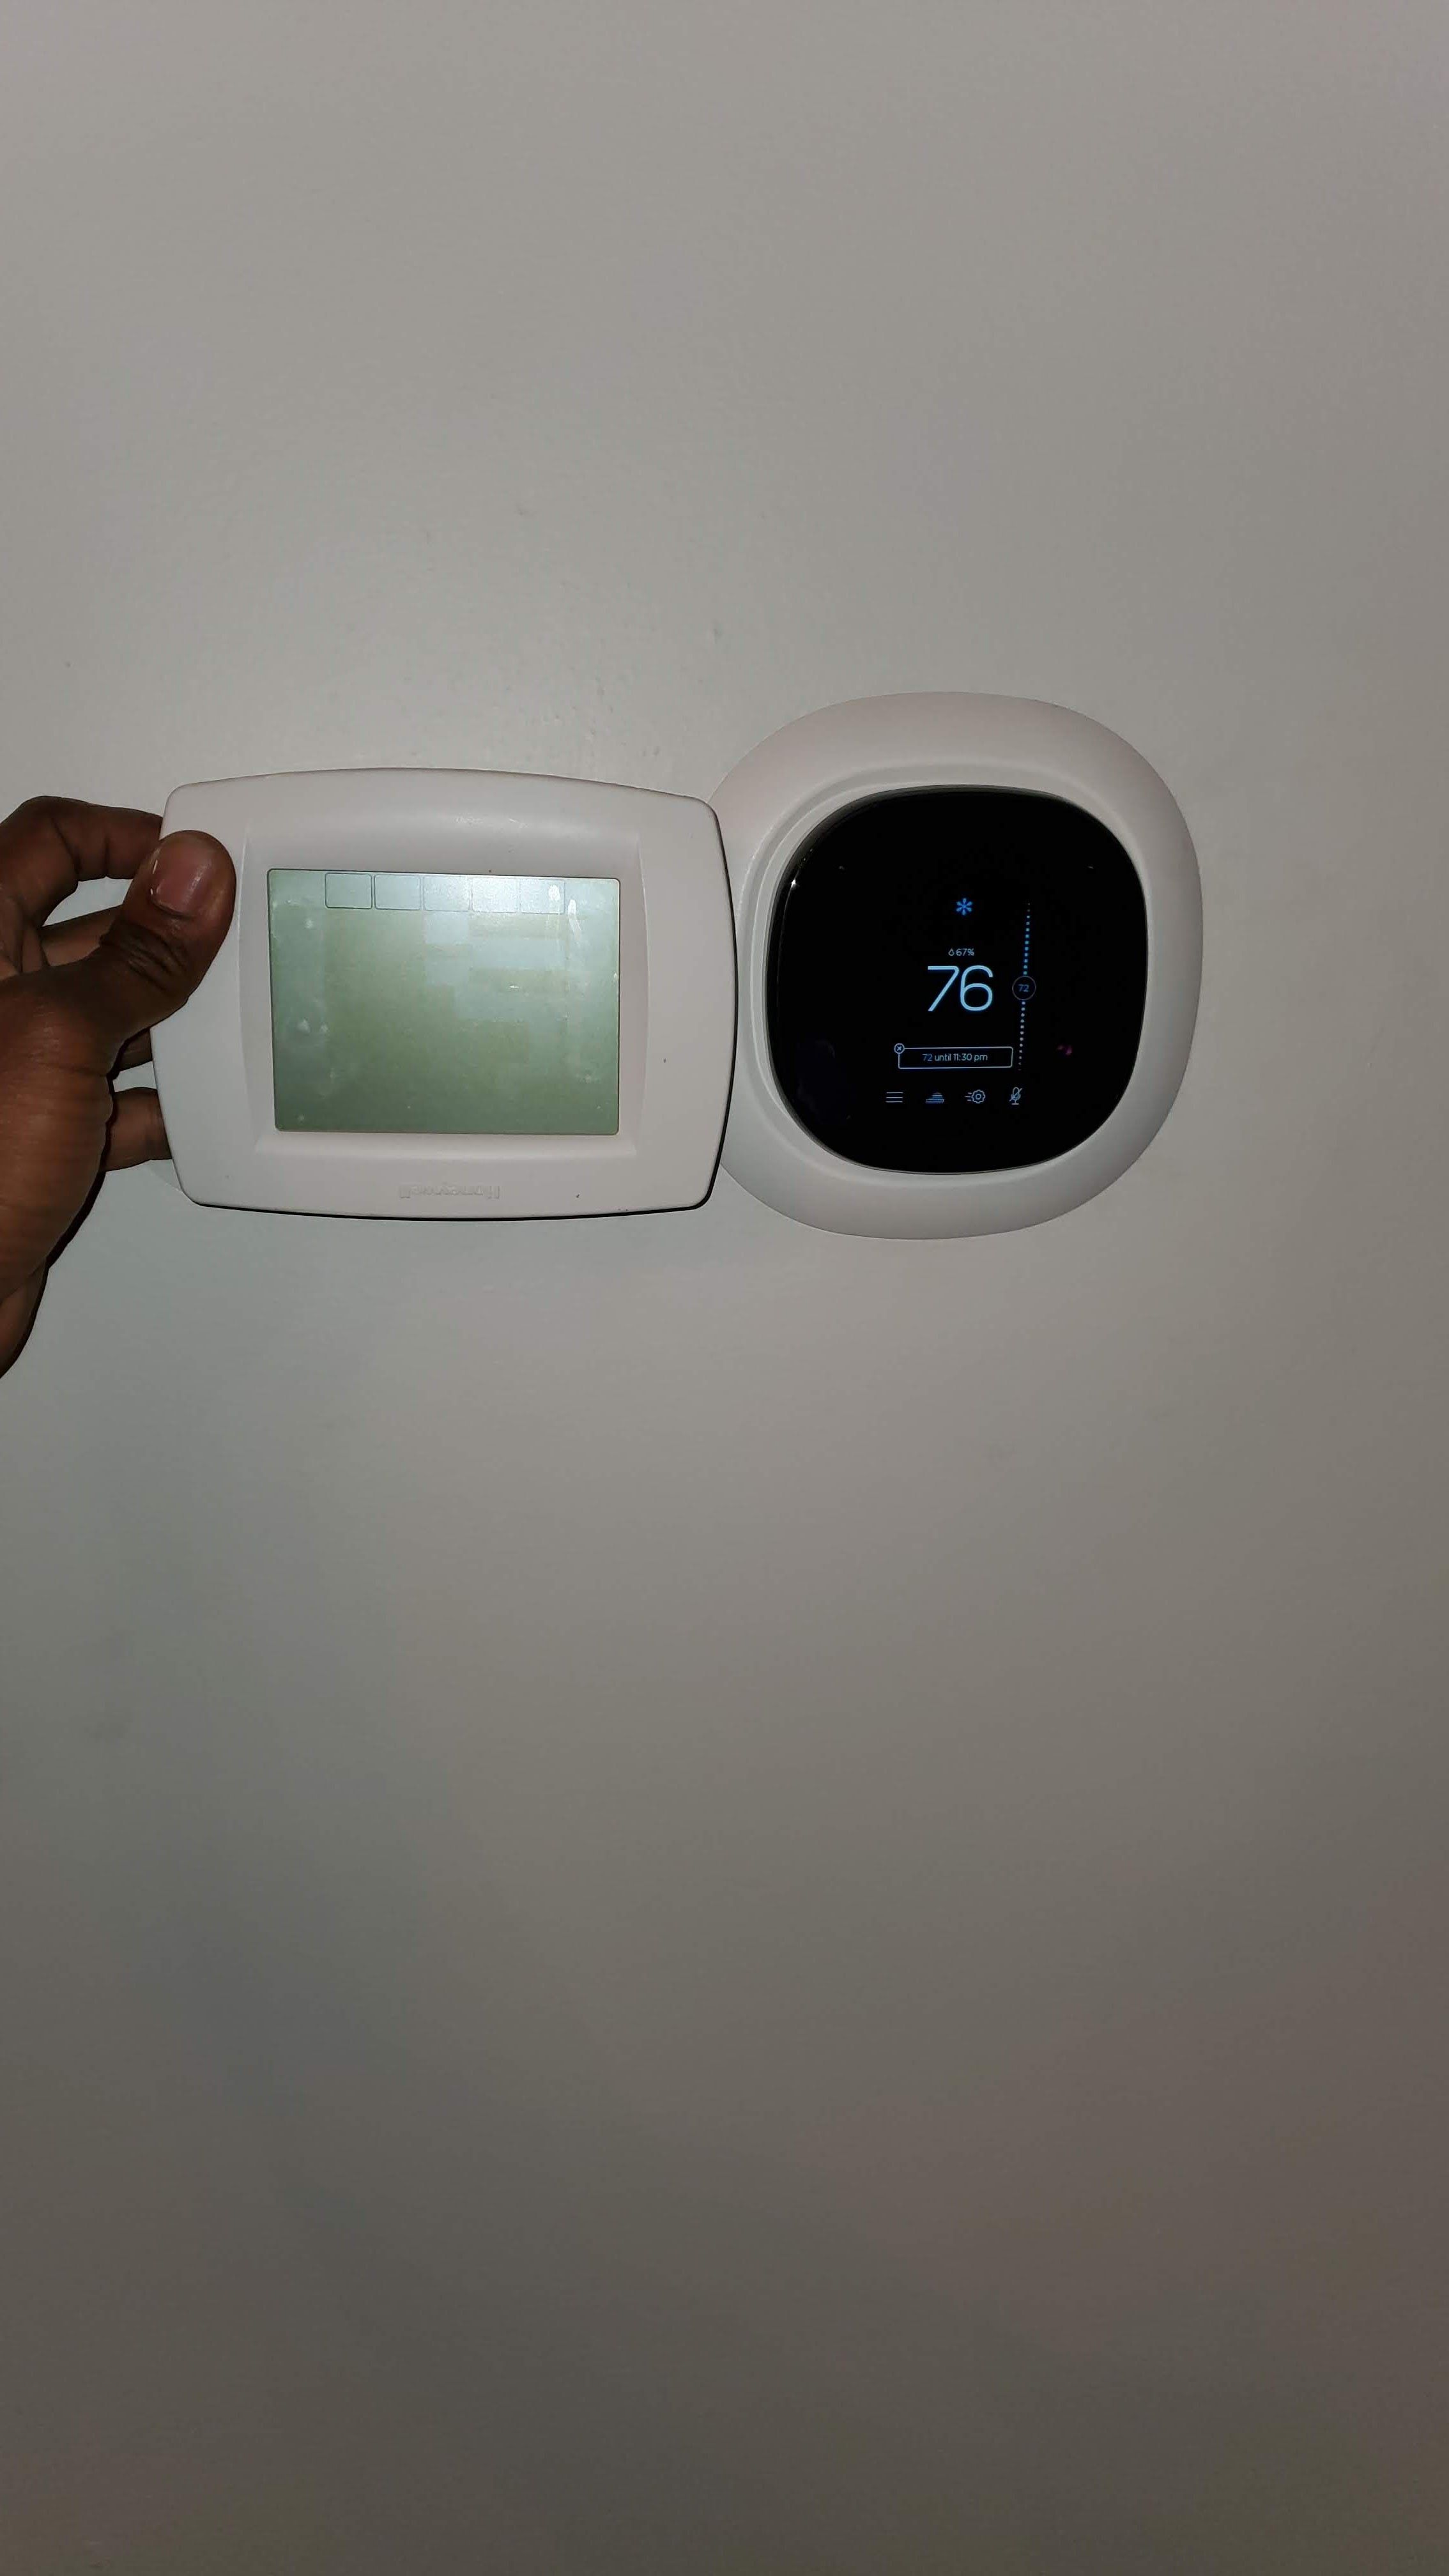 Control And Monitor The Climate In Your Home From Anywhere; Complete Temperature Control.